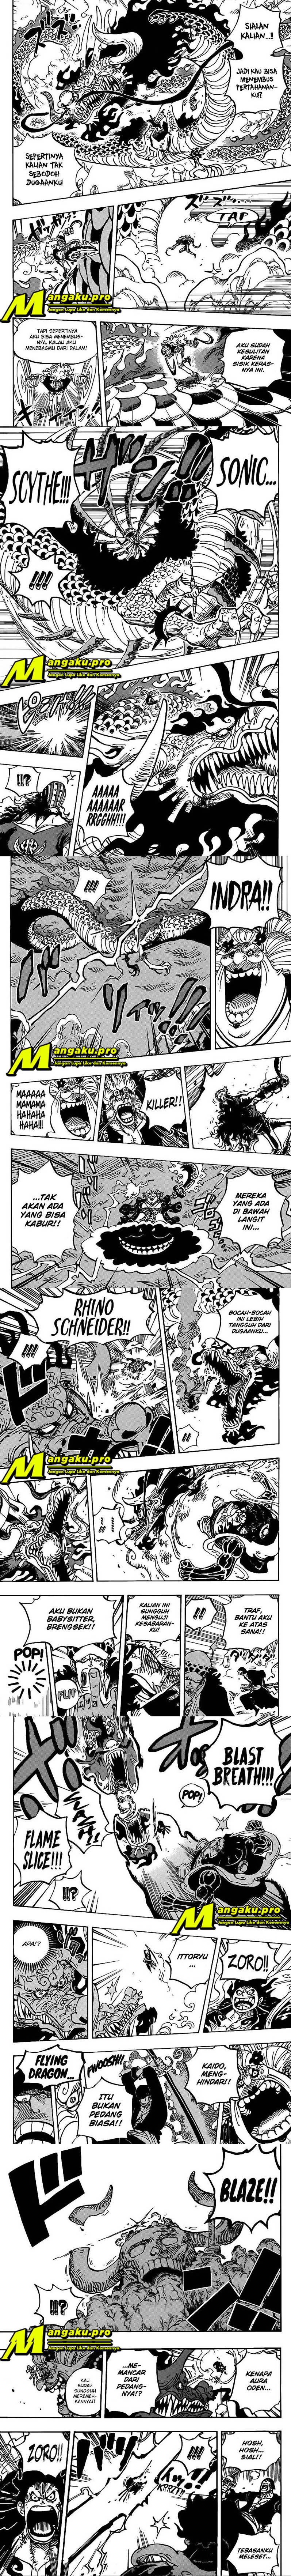 One Piece Chapter 1002 - 29